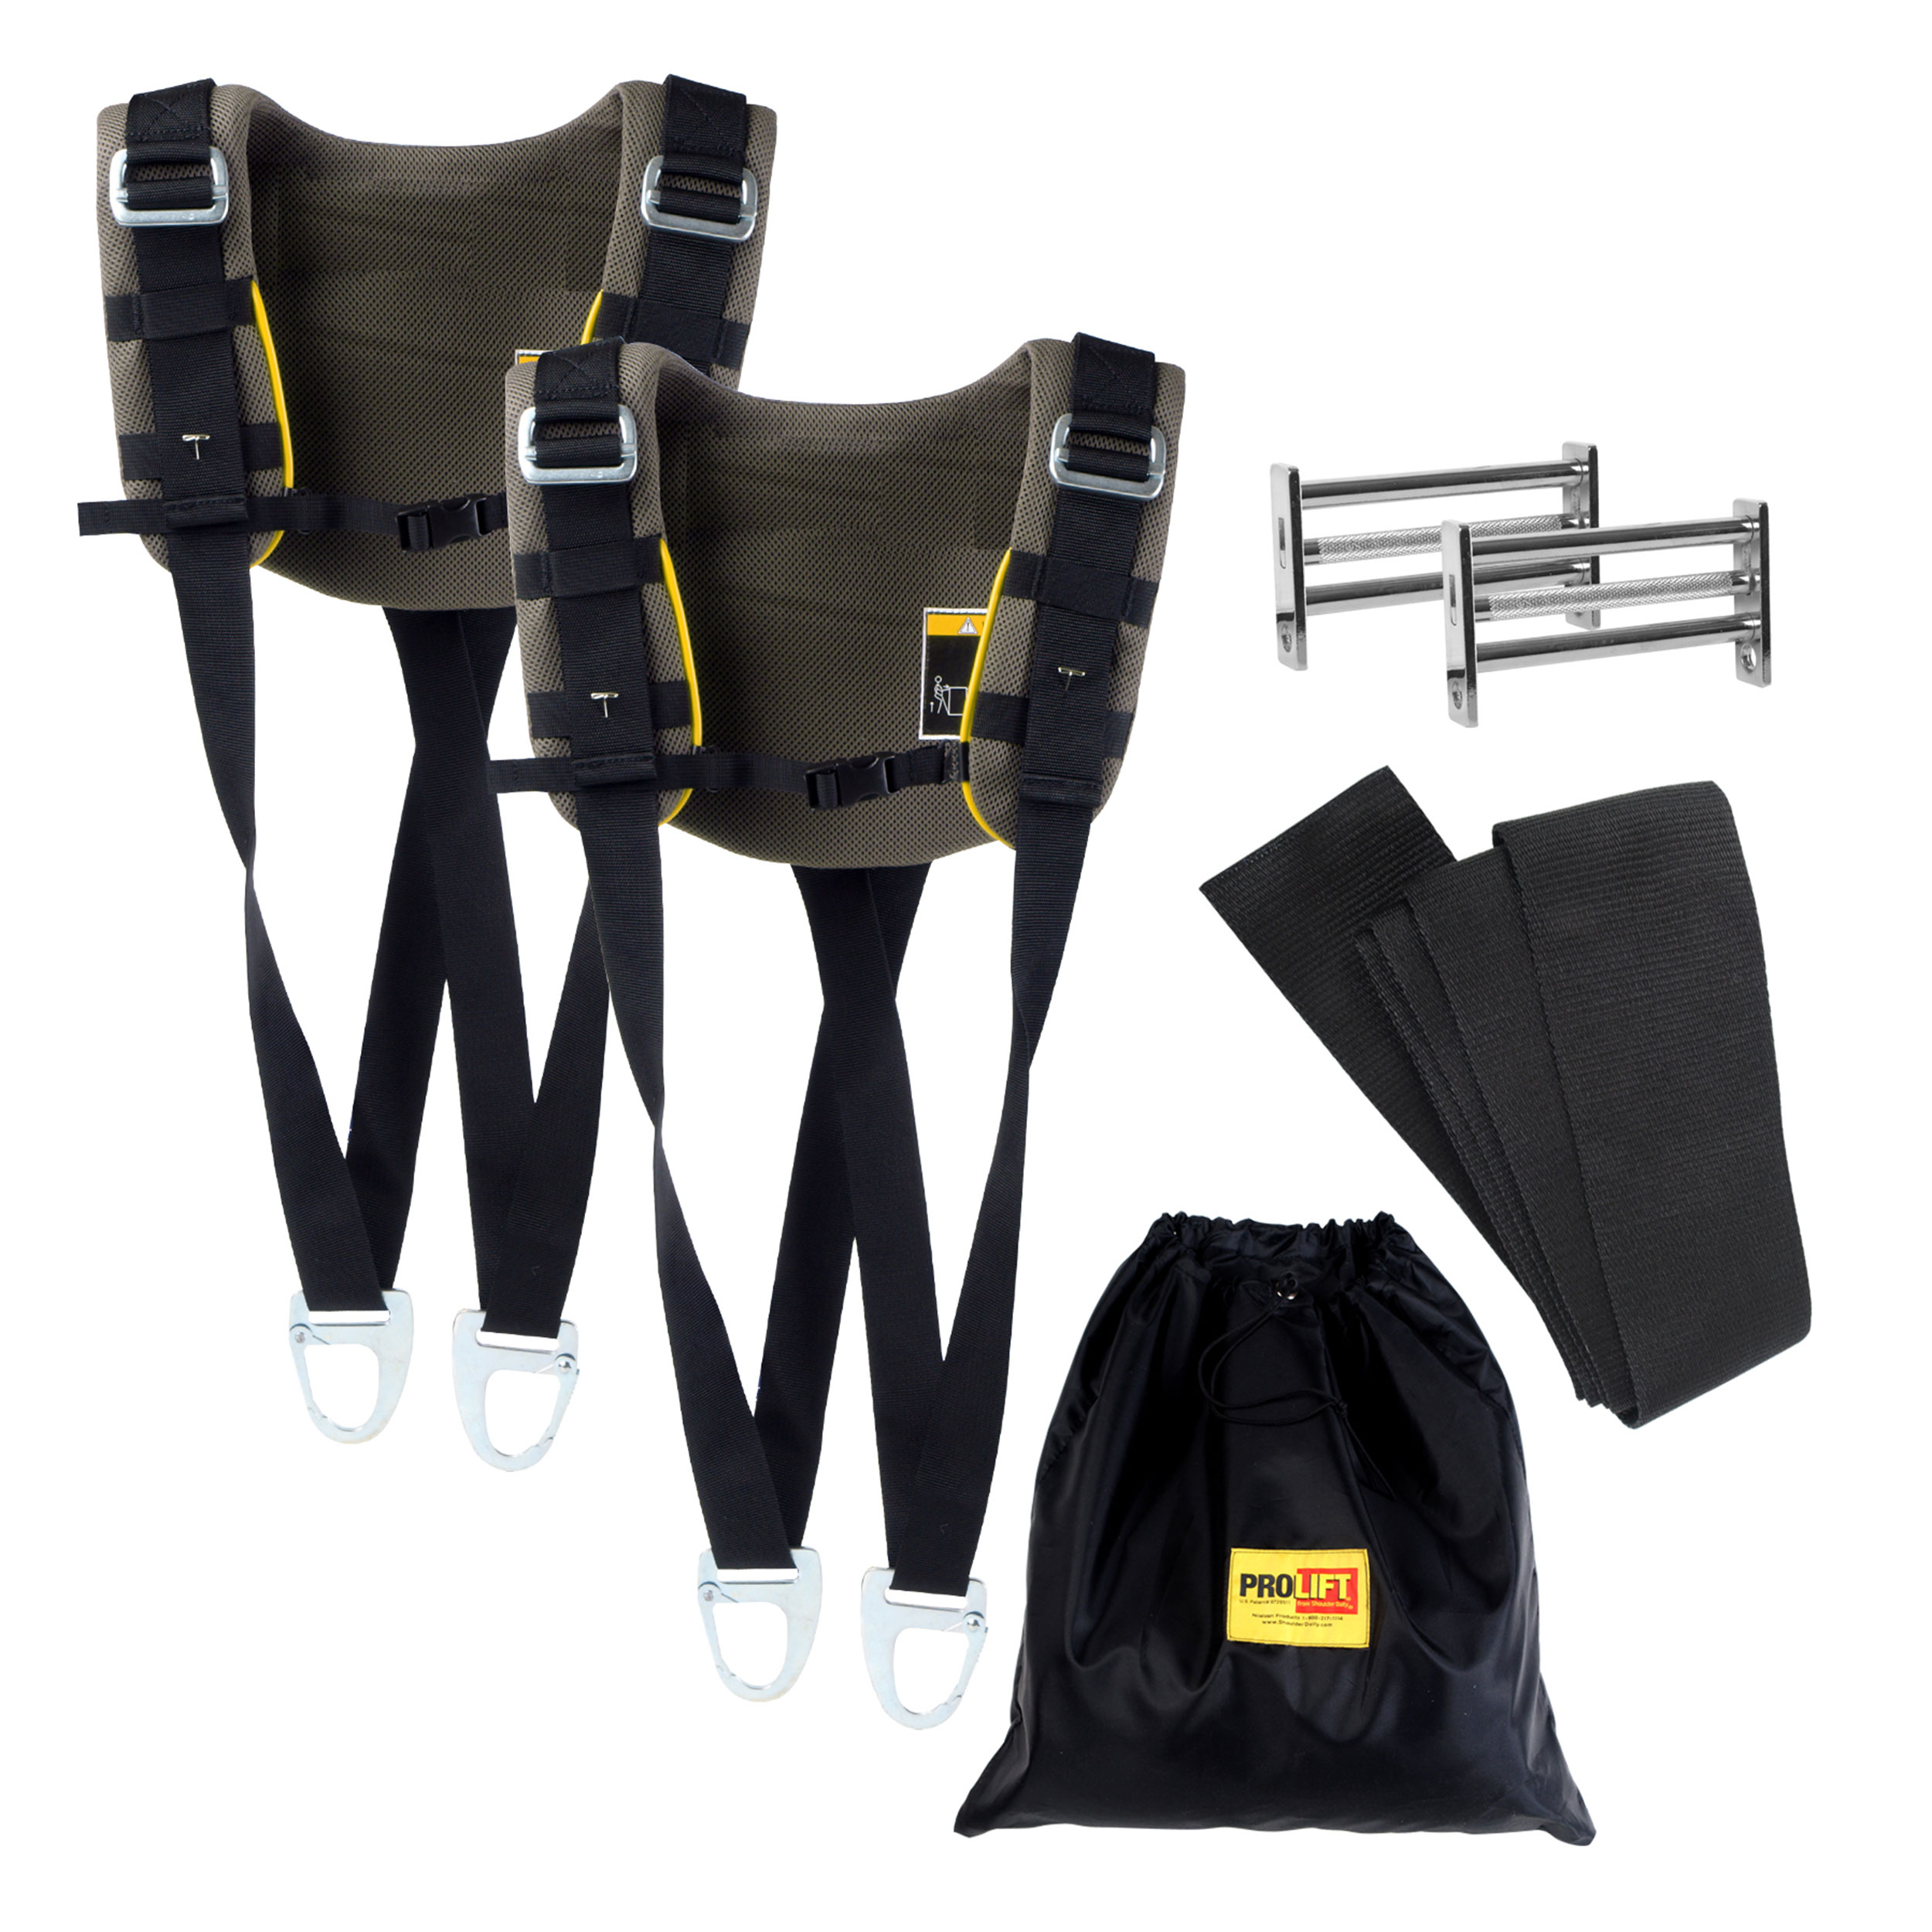 Pro Lift Professional Lifting And Moving Strap